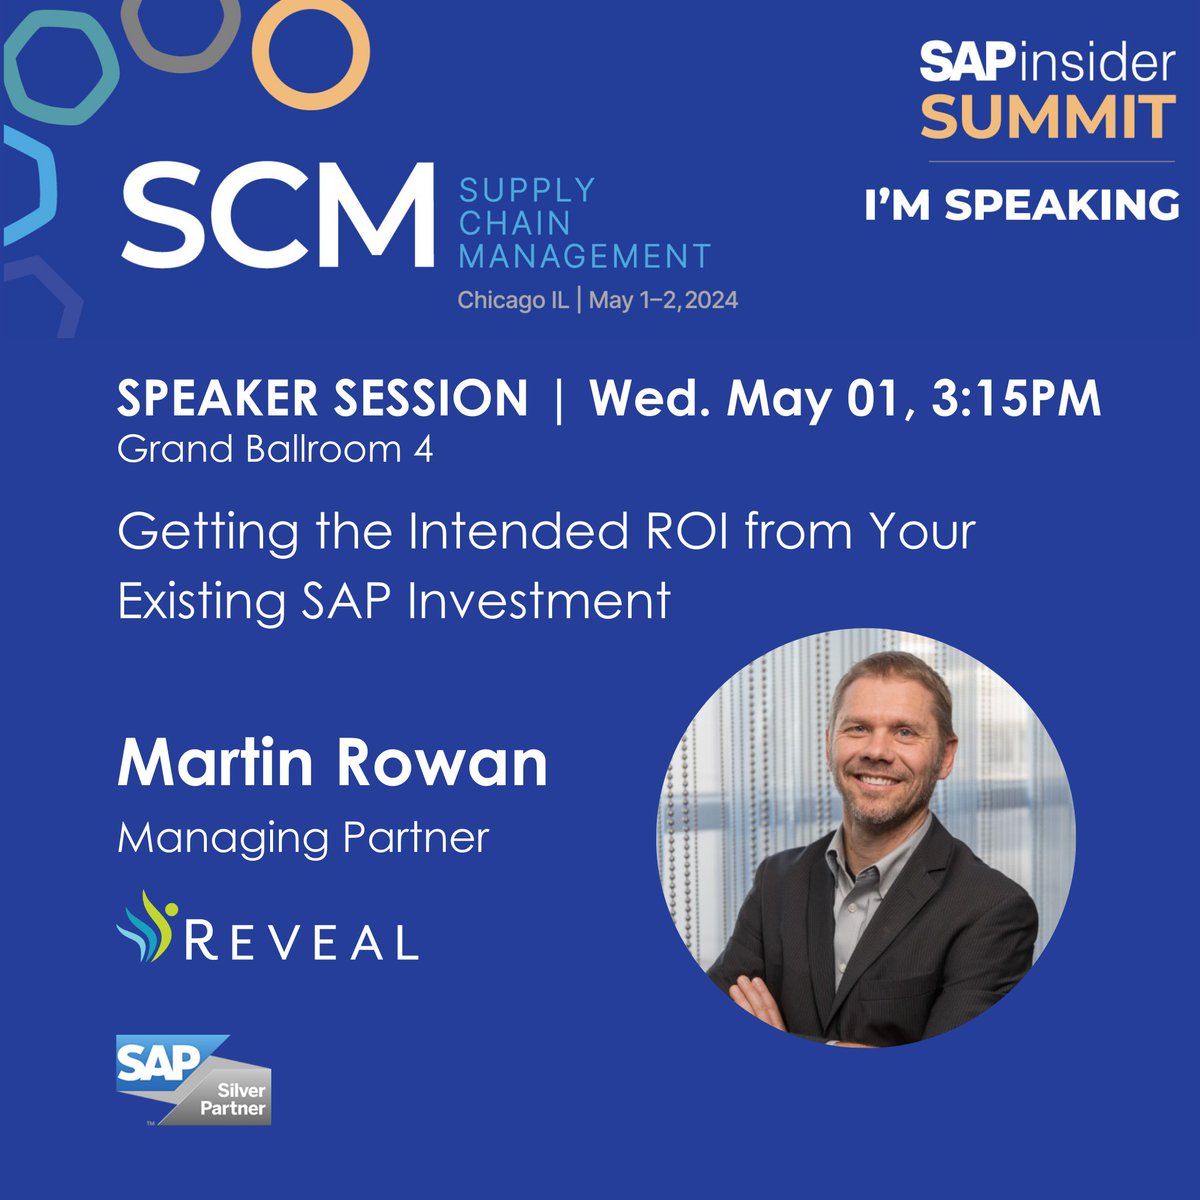 🗓️ May 01, 3:15 PM - Get a sense of whether your #SAP Implementation is delivering maximum value.

Join Martin Rowan for an insightful session on how to assess your SAP ROI and identify areas for significant improvement. lnkd.in/guk4Ctcg

SAPinsider #supplychainmanagement…